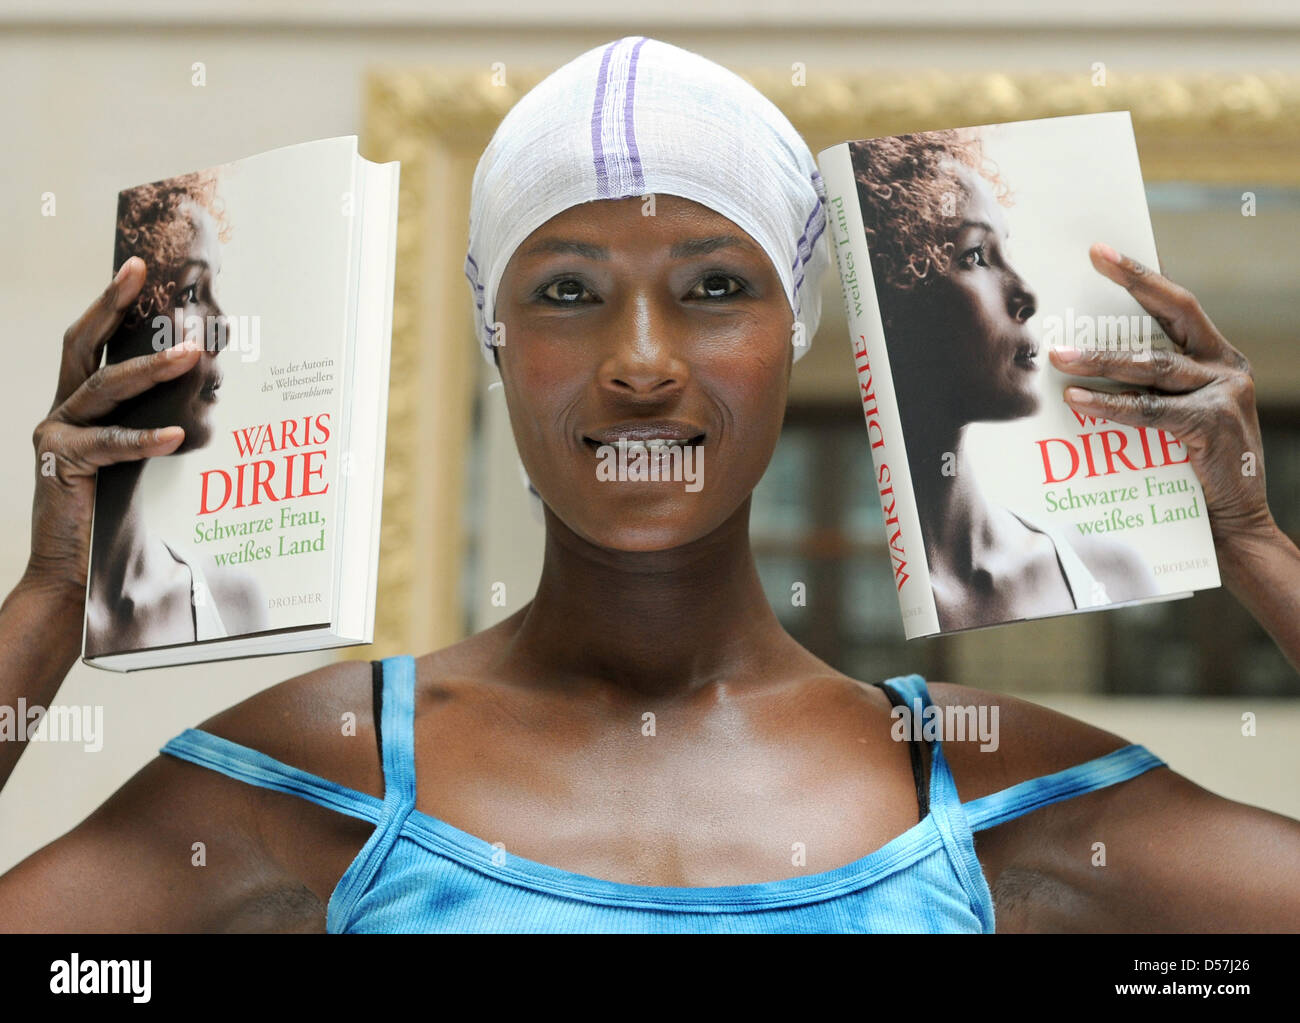 Former model Waris Dirie presents her new book 'Schwarze Frau, weißes Land' ('Black Woman, White Country') during a press conference at hotel Adlon in Berlin, Germany, 18 May 2010. In the book, Dirie talks about her life in the new, white home and her longing for Africa. Photo: JENS KALAENE Stock Photo